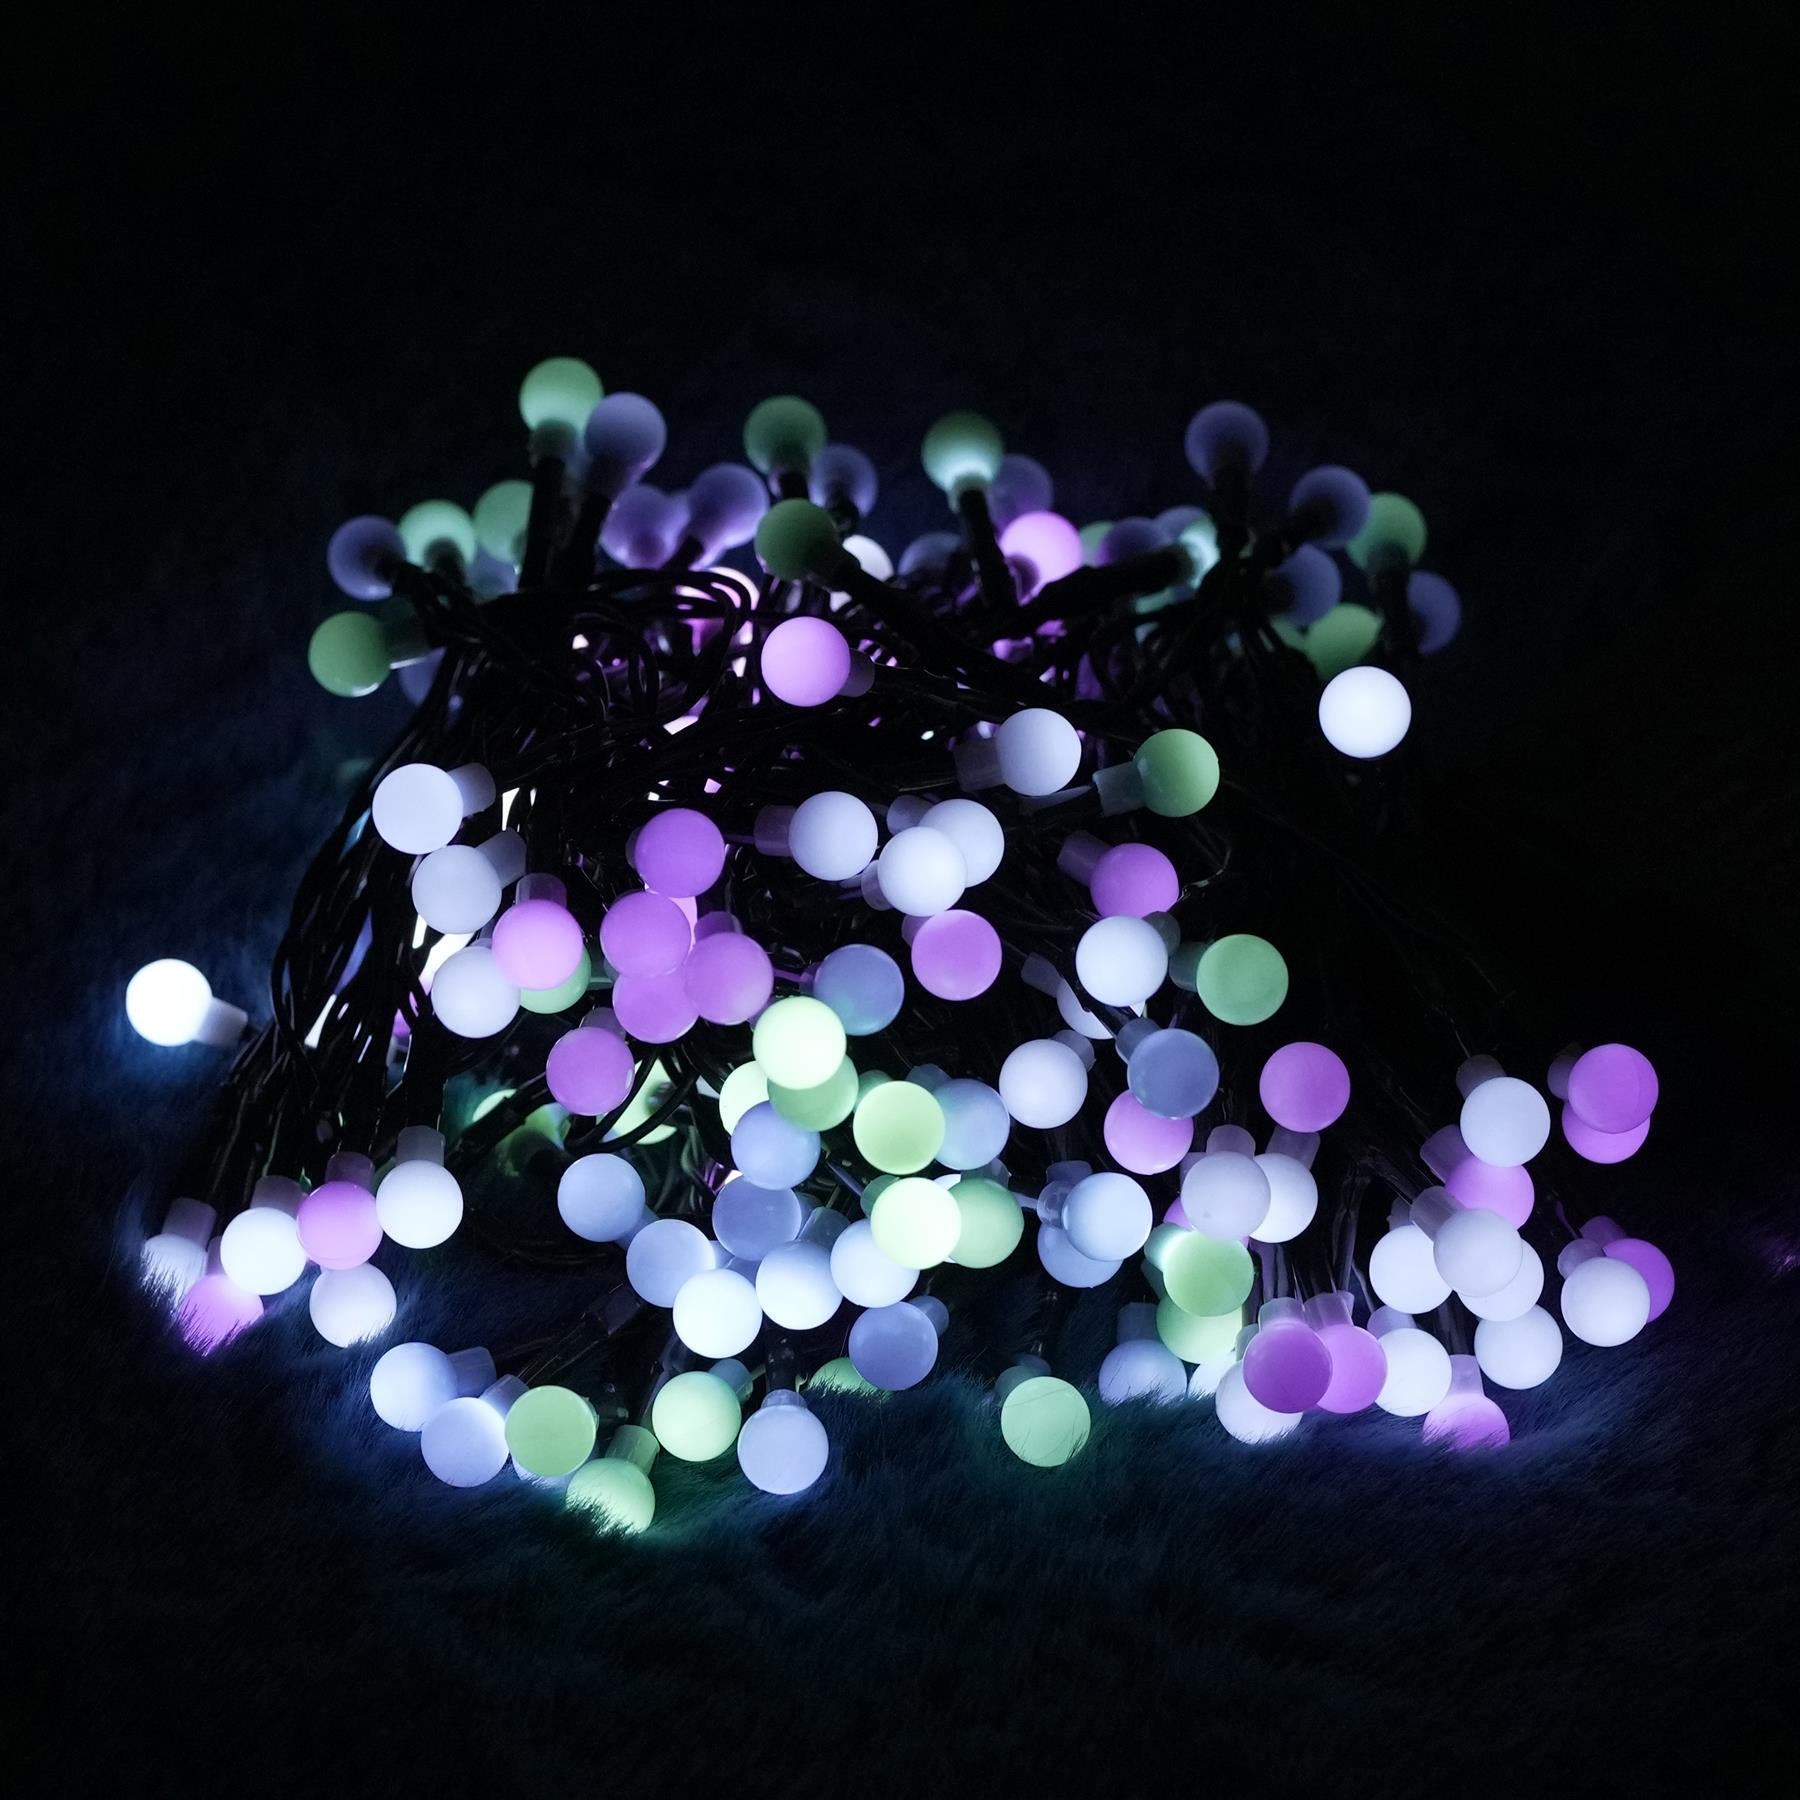 100 Berry Christmas LED Lights Pastel by Geezy - UKBuyZone